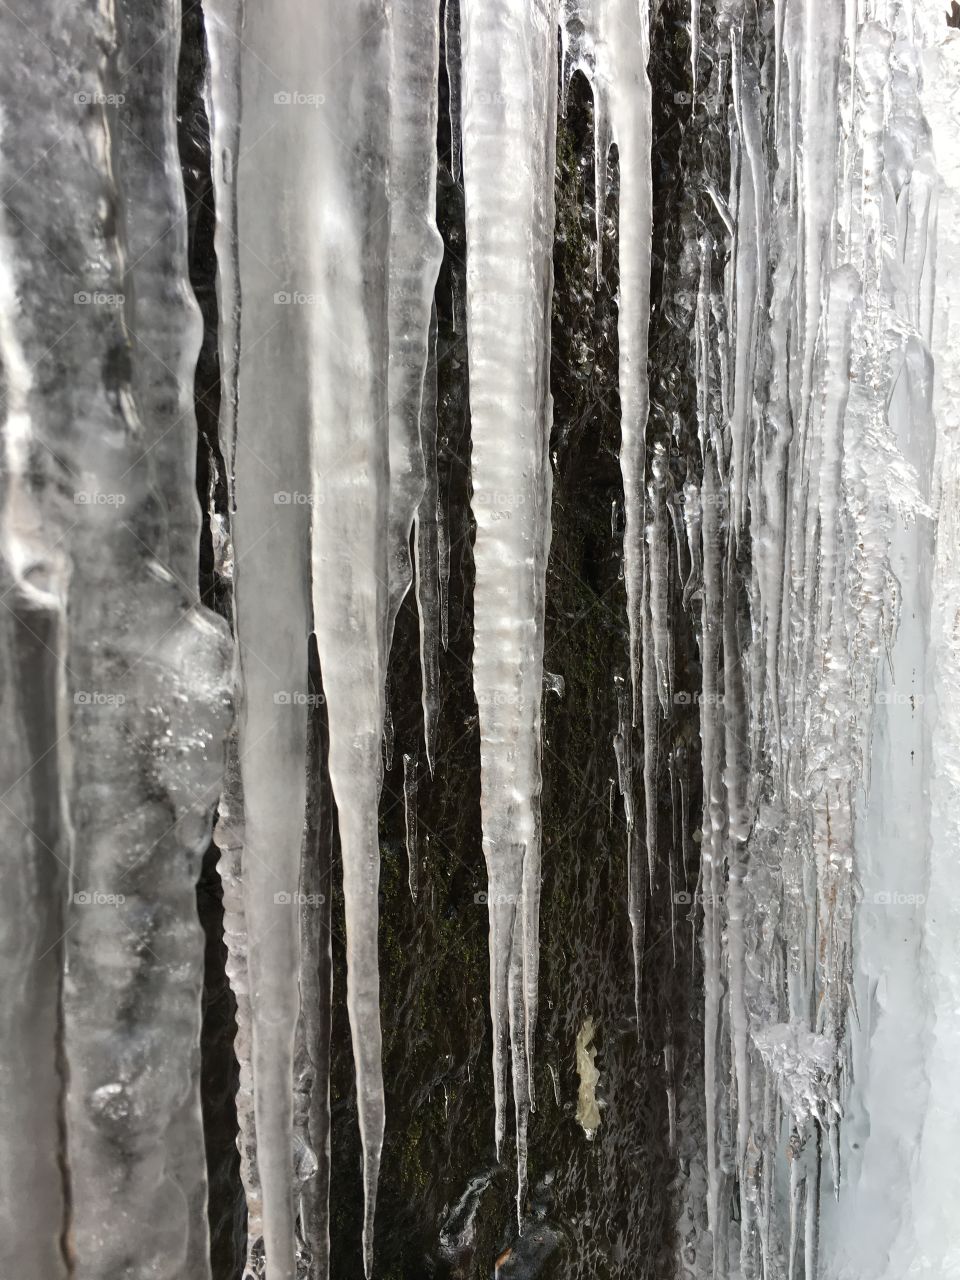 Icicle from frozen waterfalls 